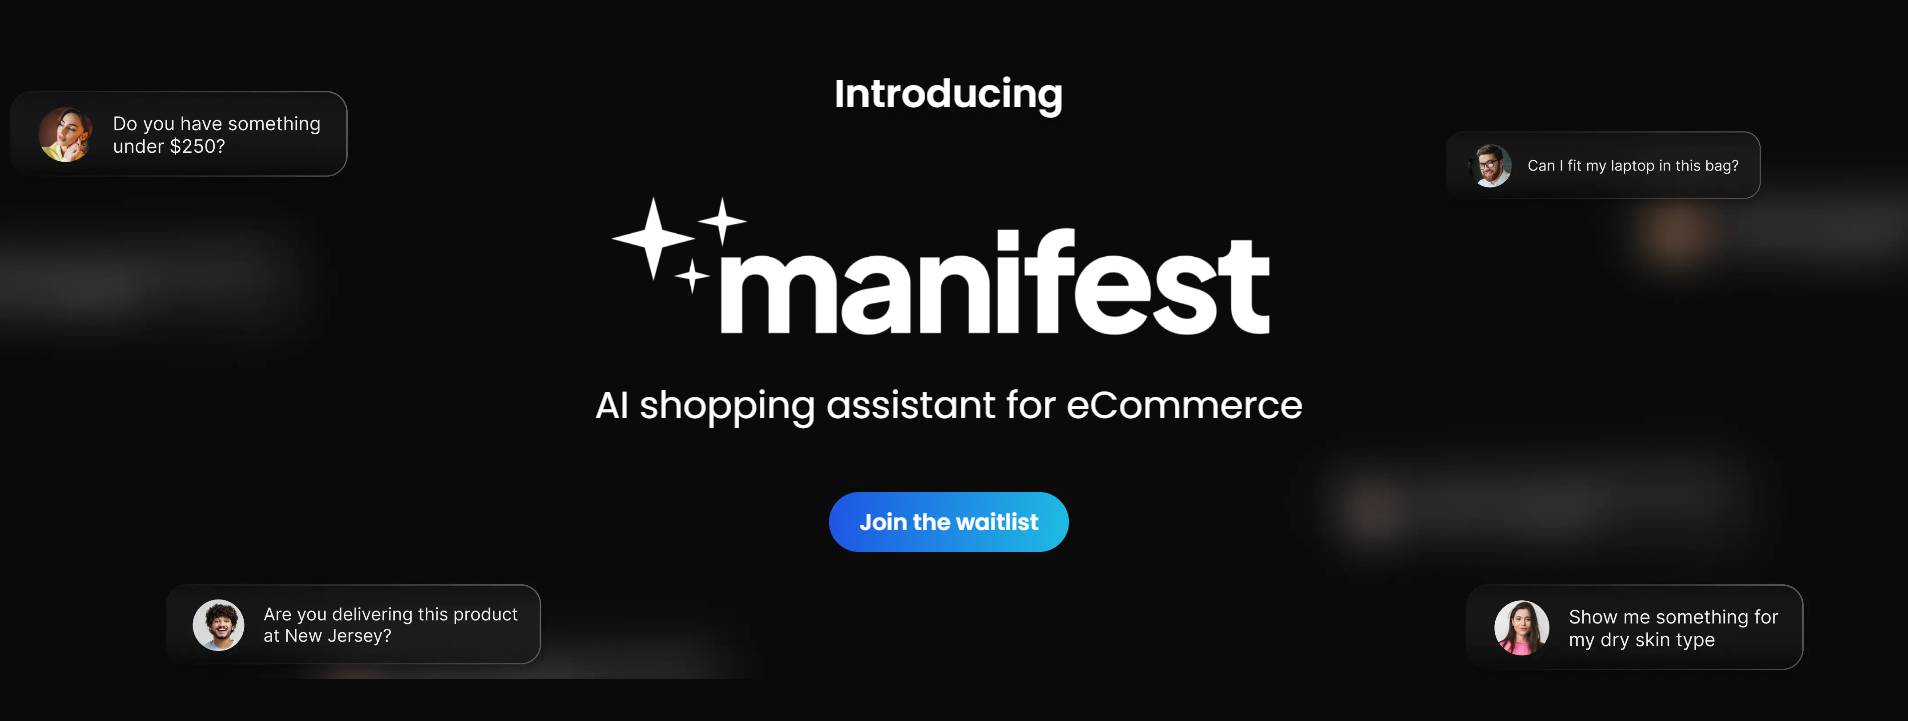 Manifest AI - A shopify app to help buyers find relevant products and information